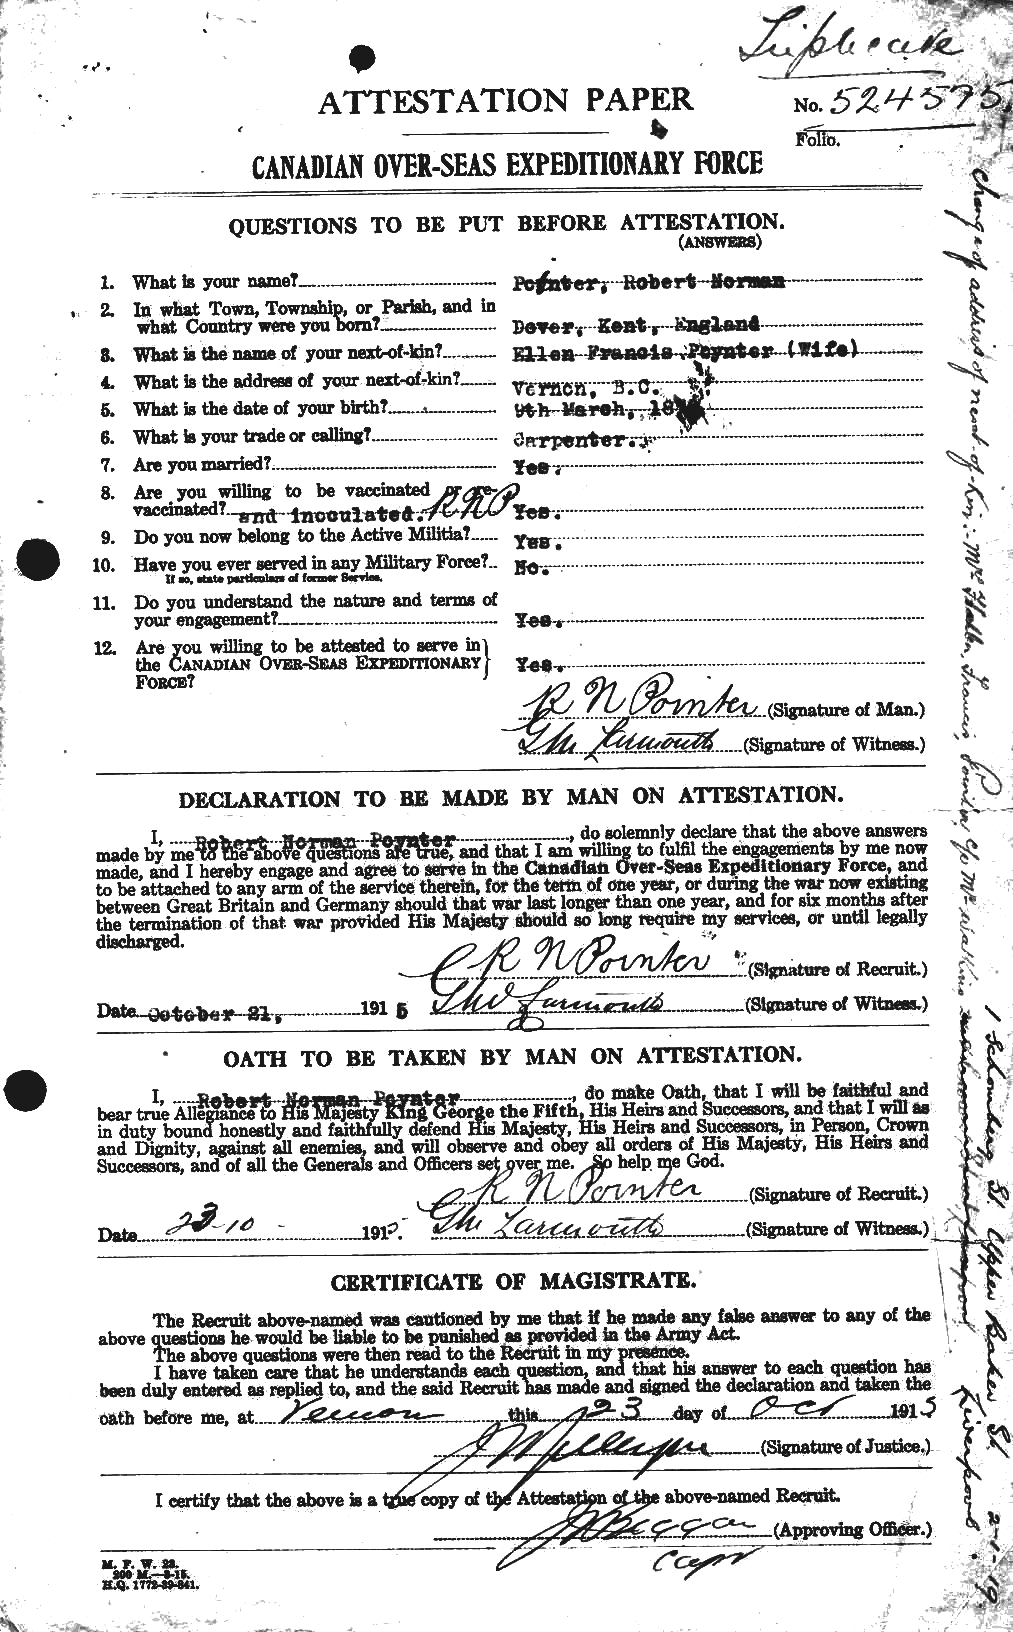 Personnel Records of the First World War - CEF 579291a